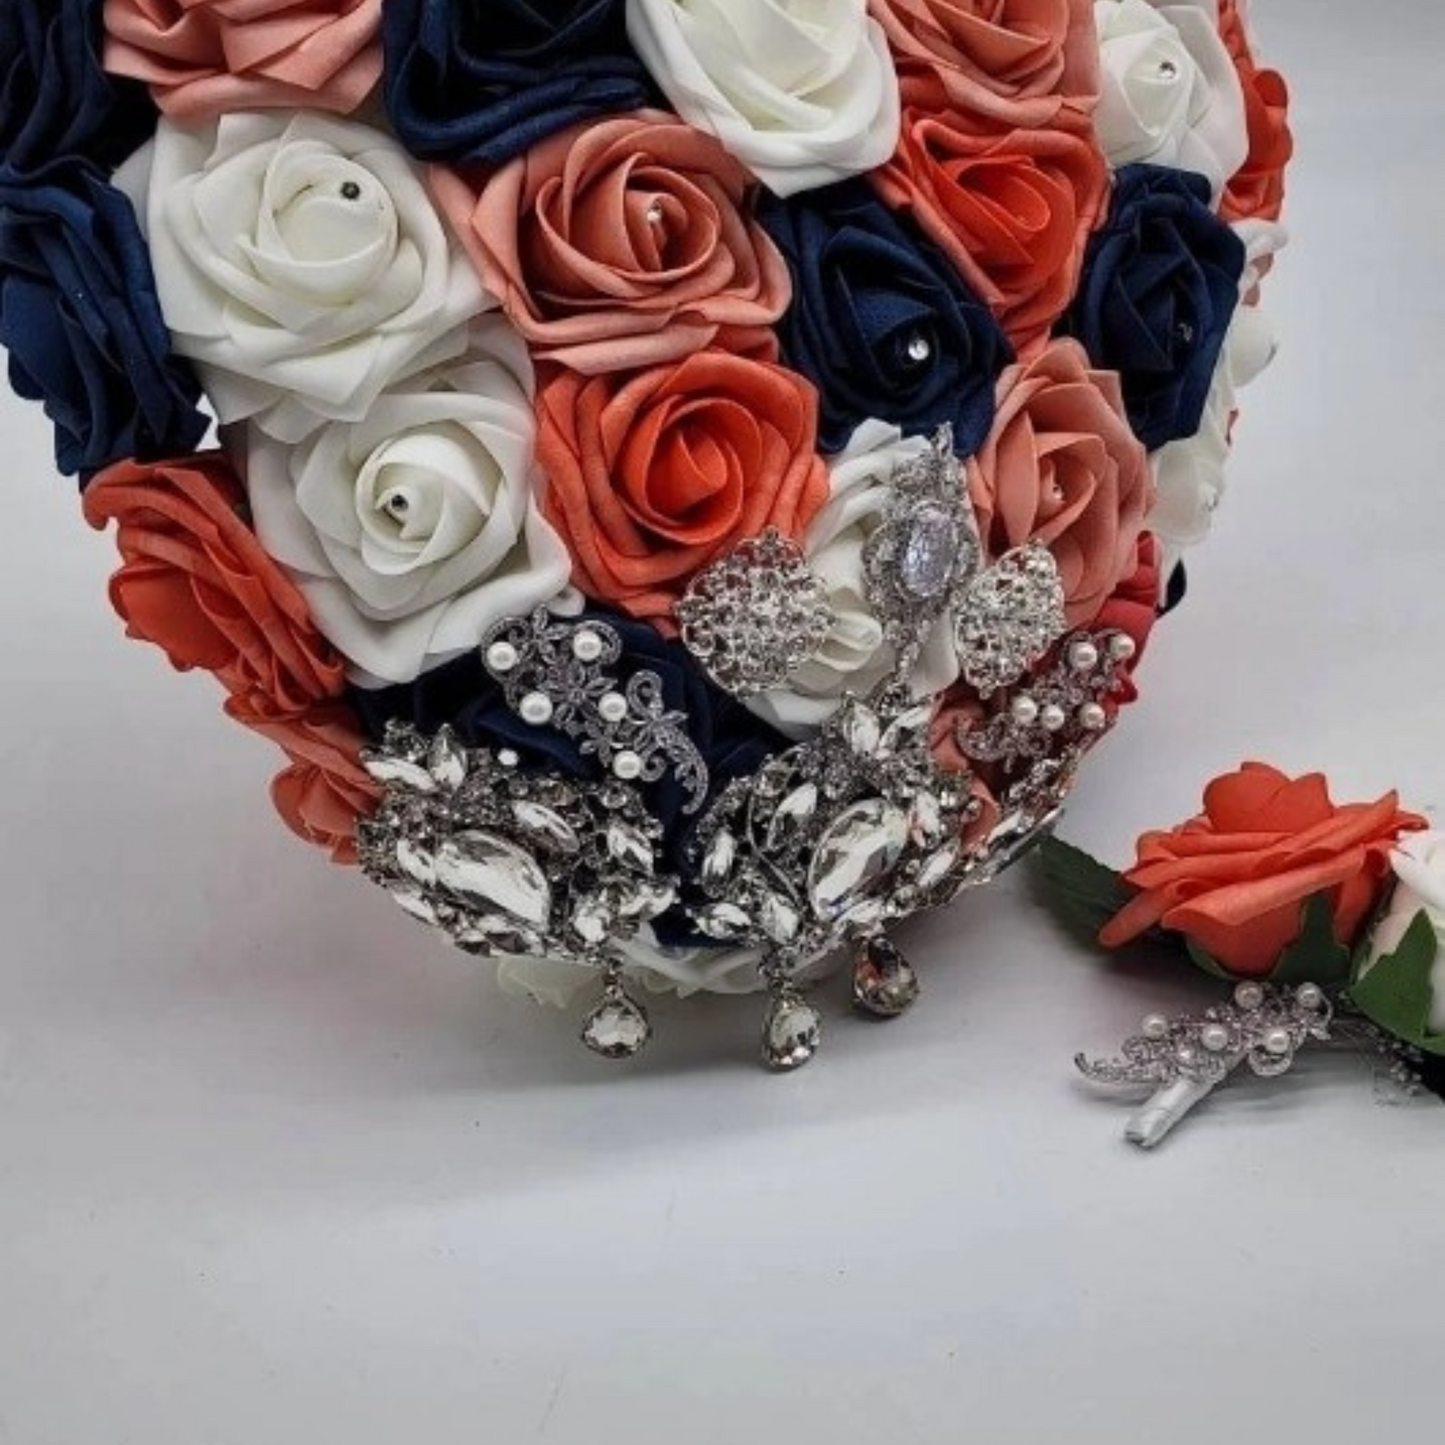 Heart Shaped Bridal Bouquet in Navy, Coral, and White